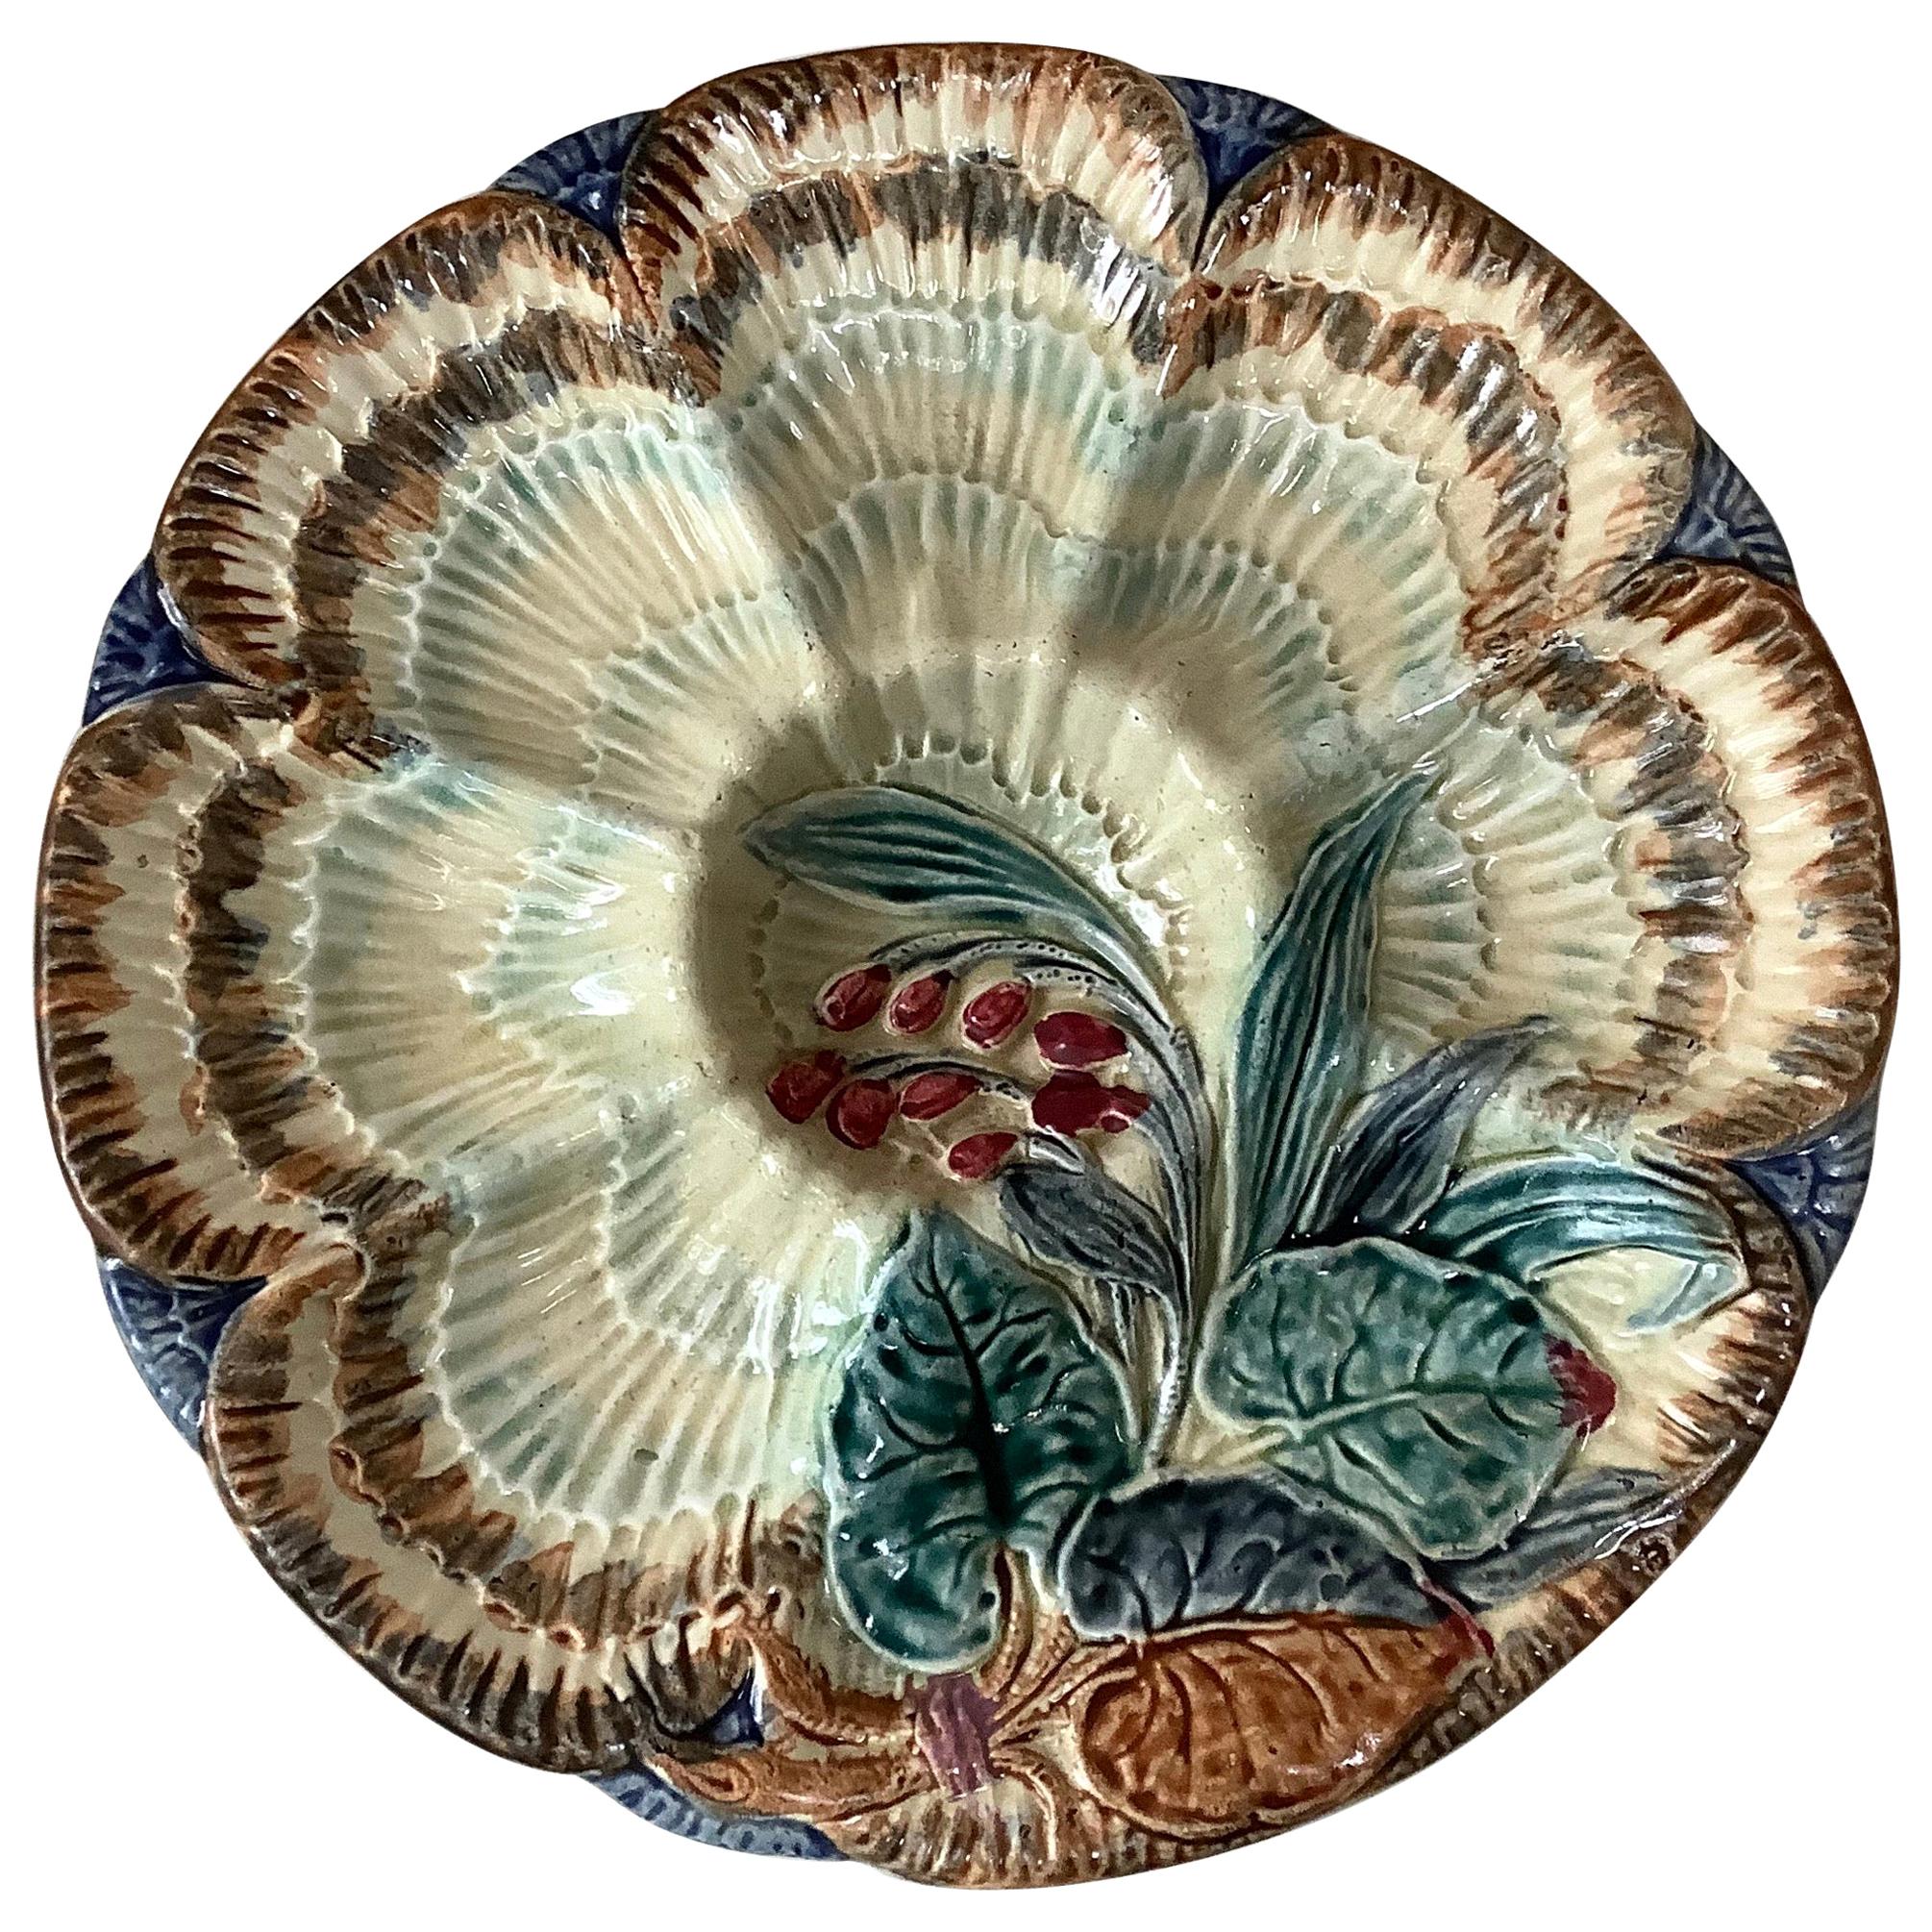 Belgian 19th Century Majolica Oyster Plate Wasmuel